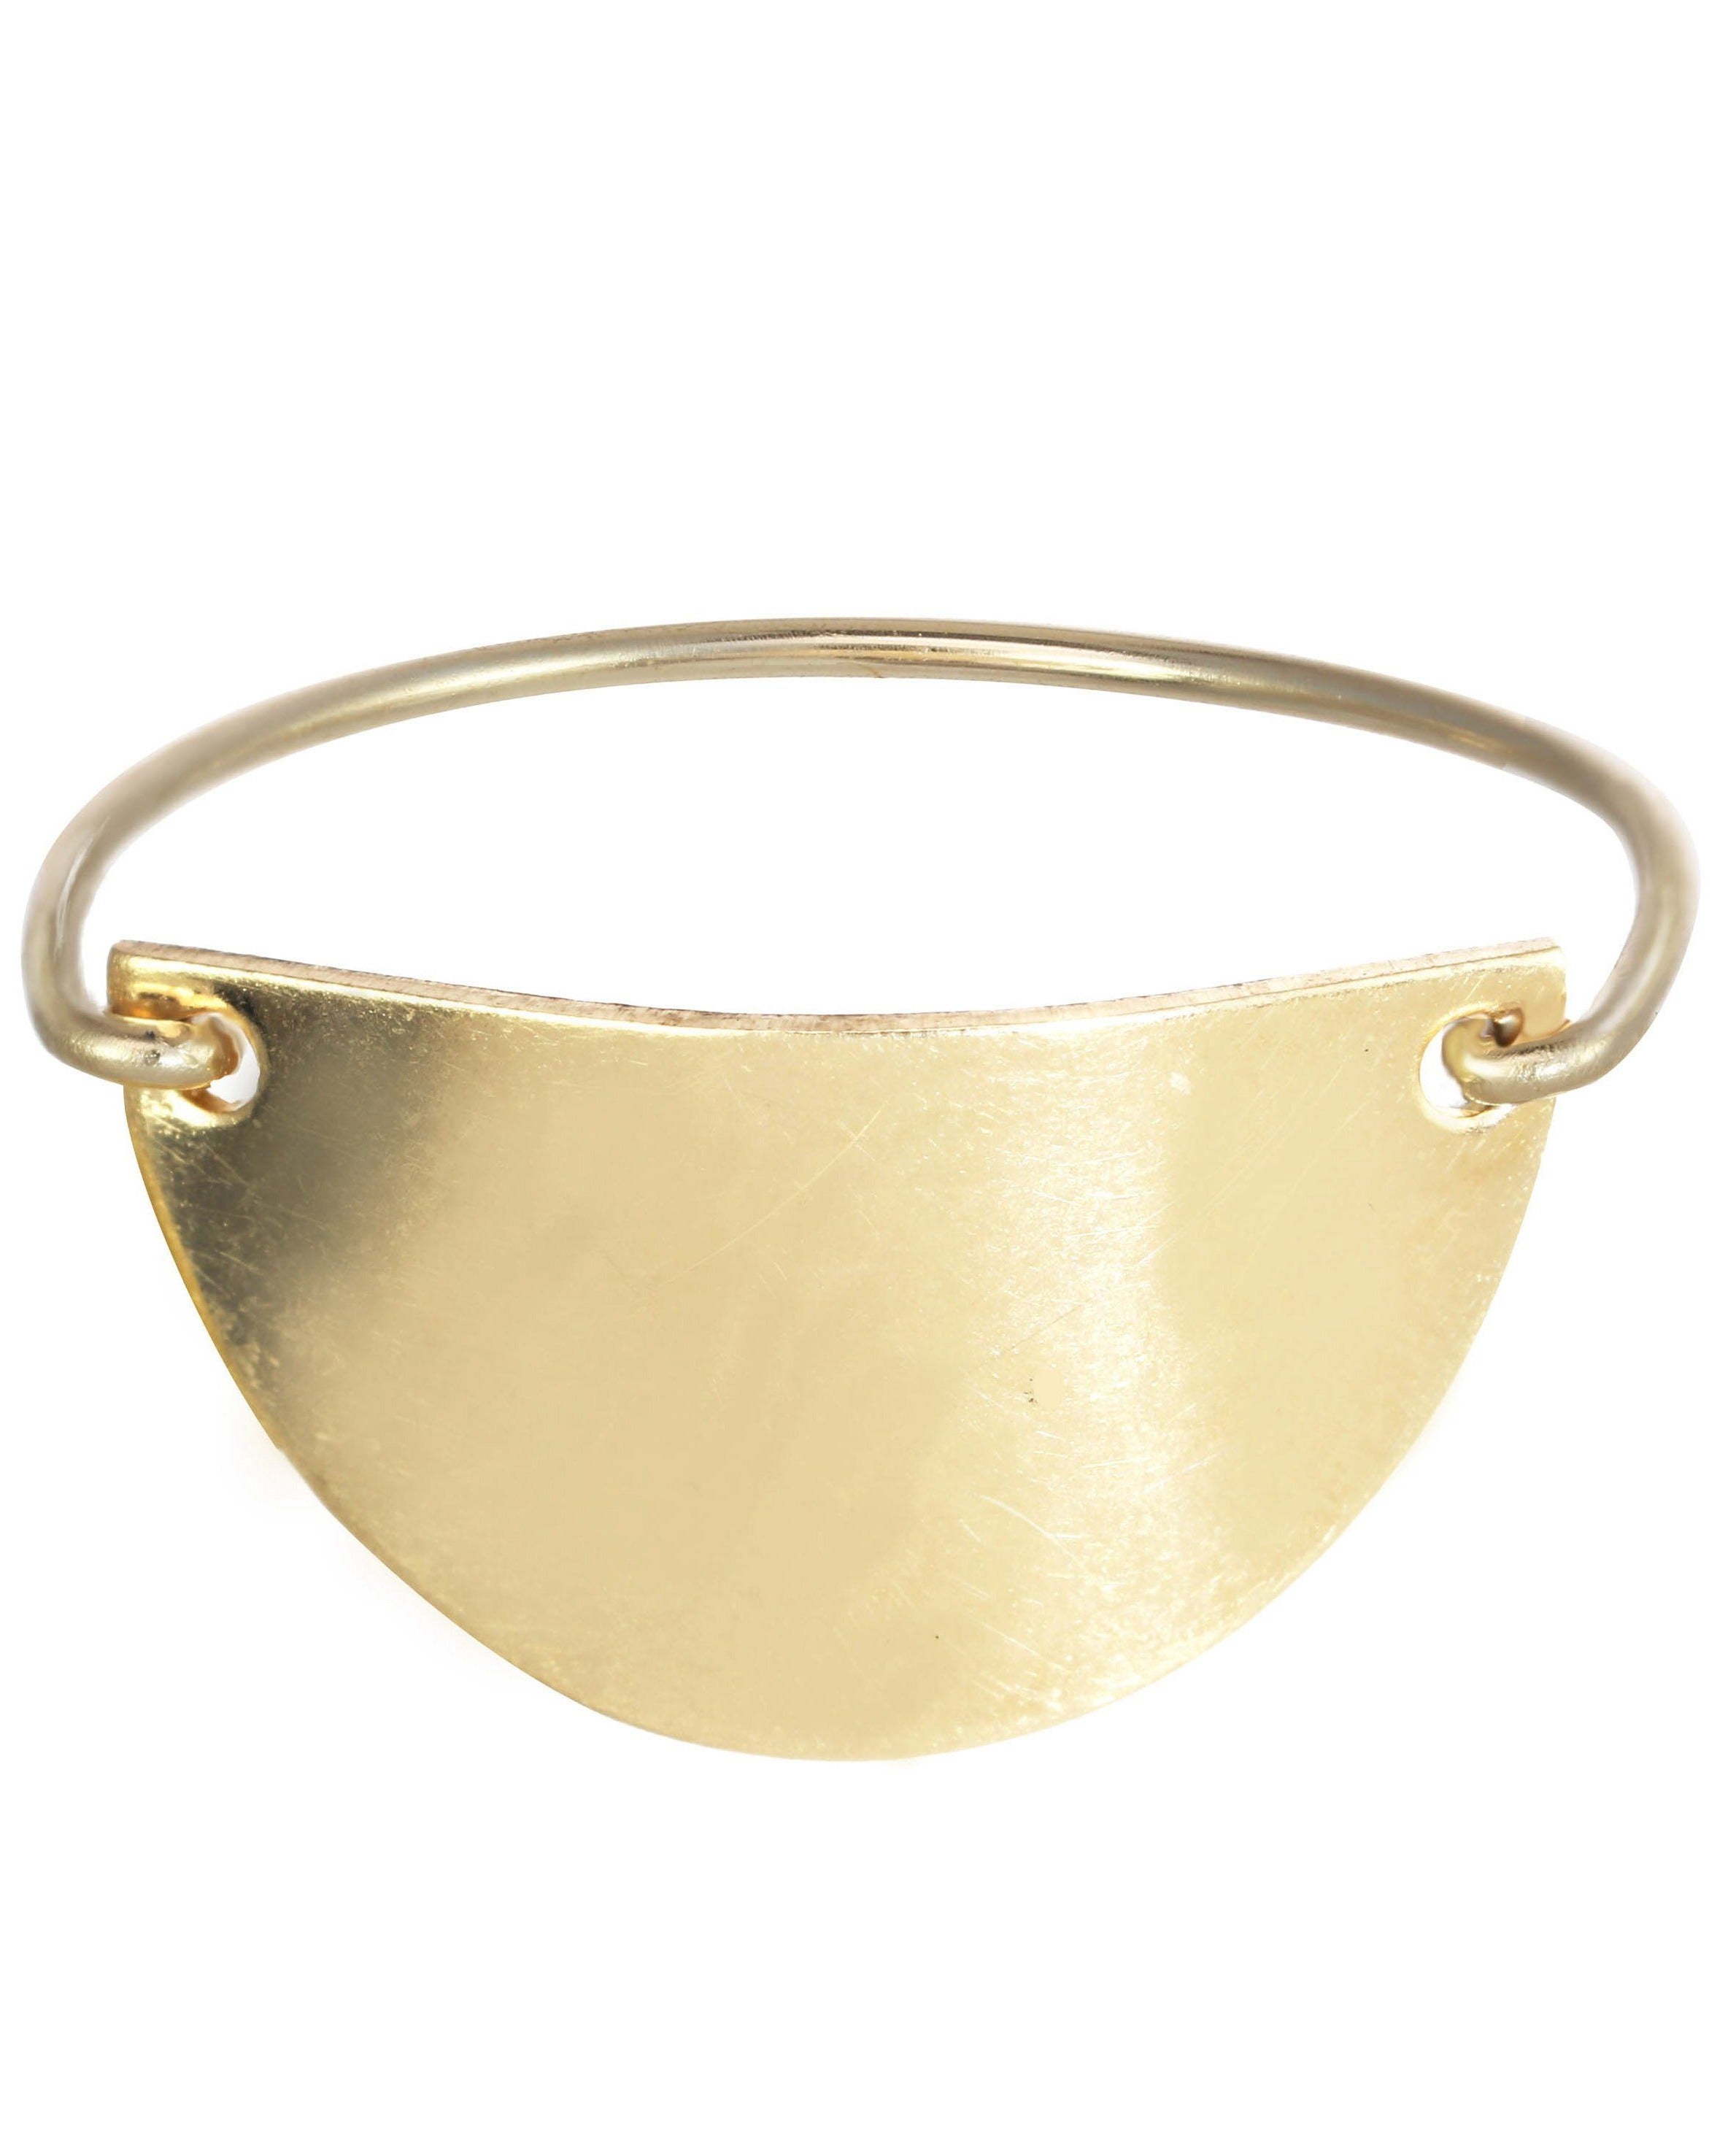 Meda Ring by KOZAKH. A 1mm band crafted in 14K Gold Filled, featuring a half moon shaped flat metal.